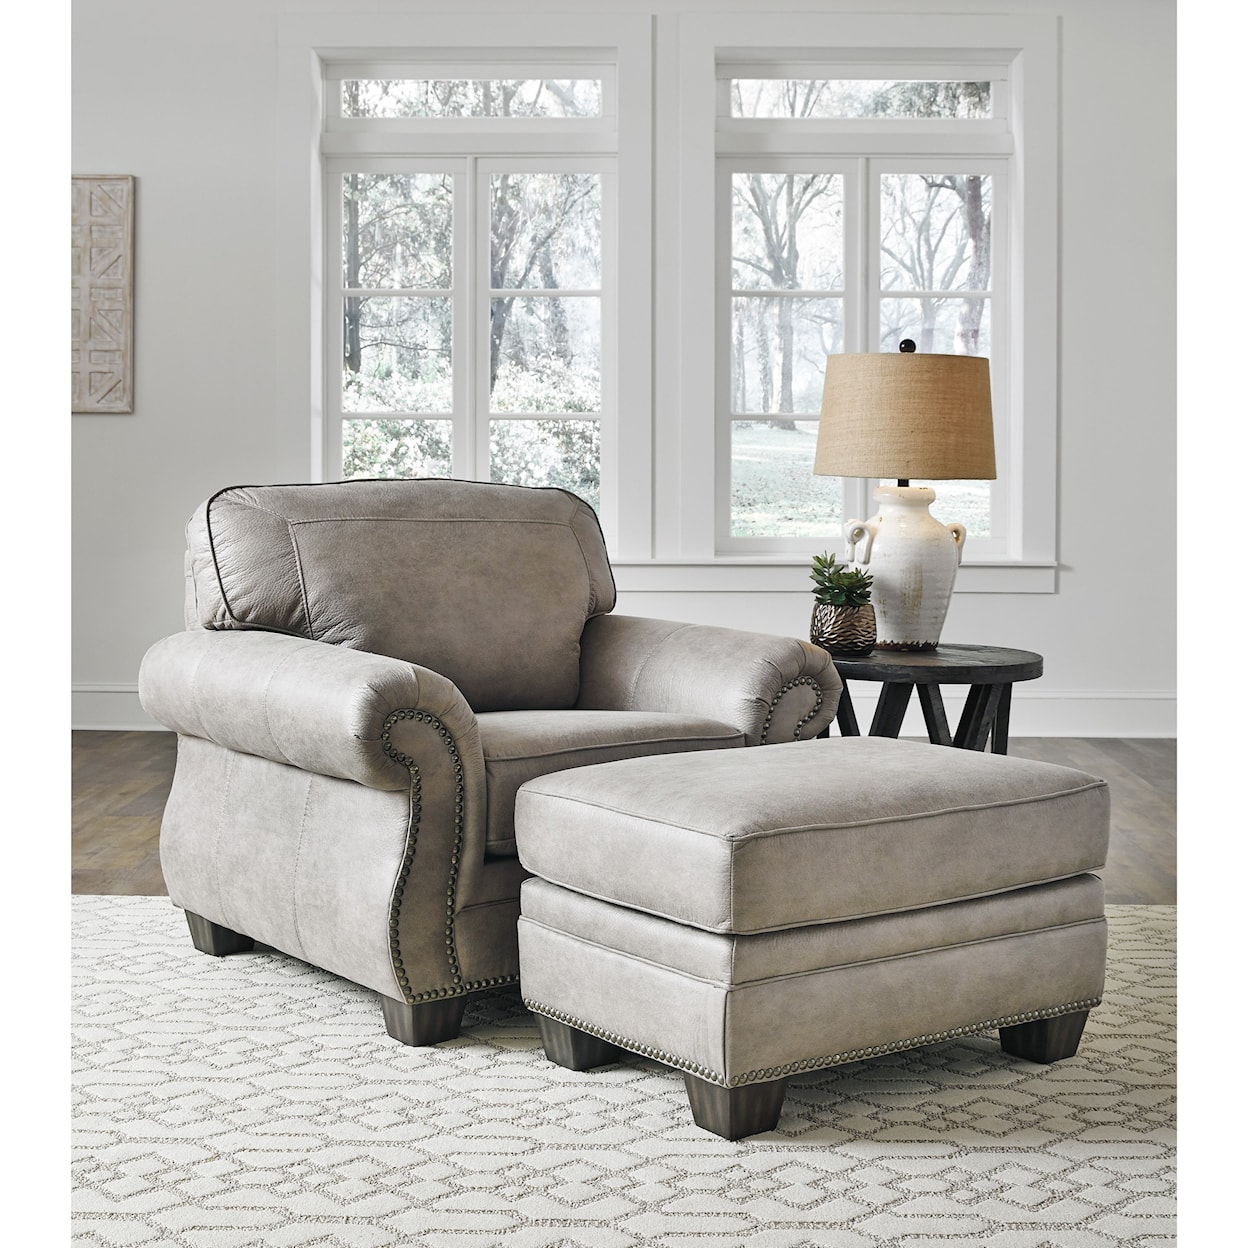 Signature Design by Ashley Furniture Olsberg Chair and Ottoman